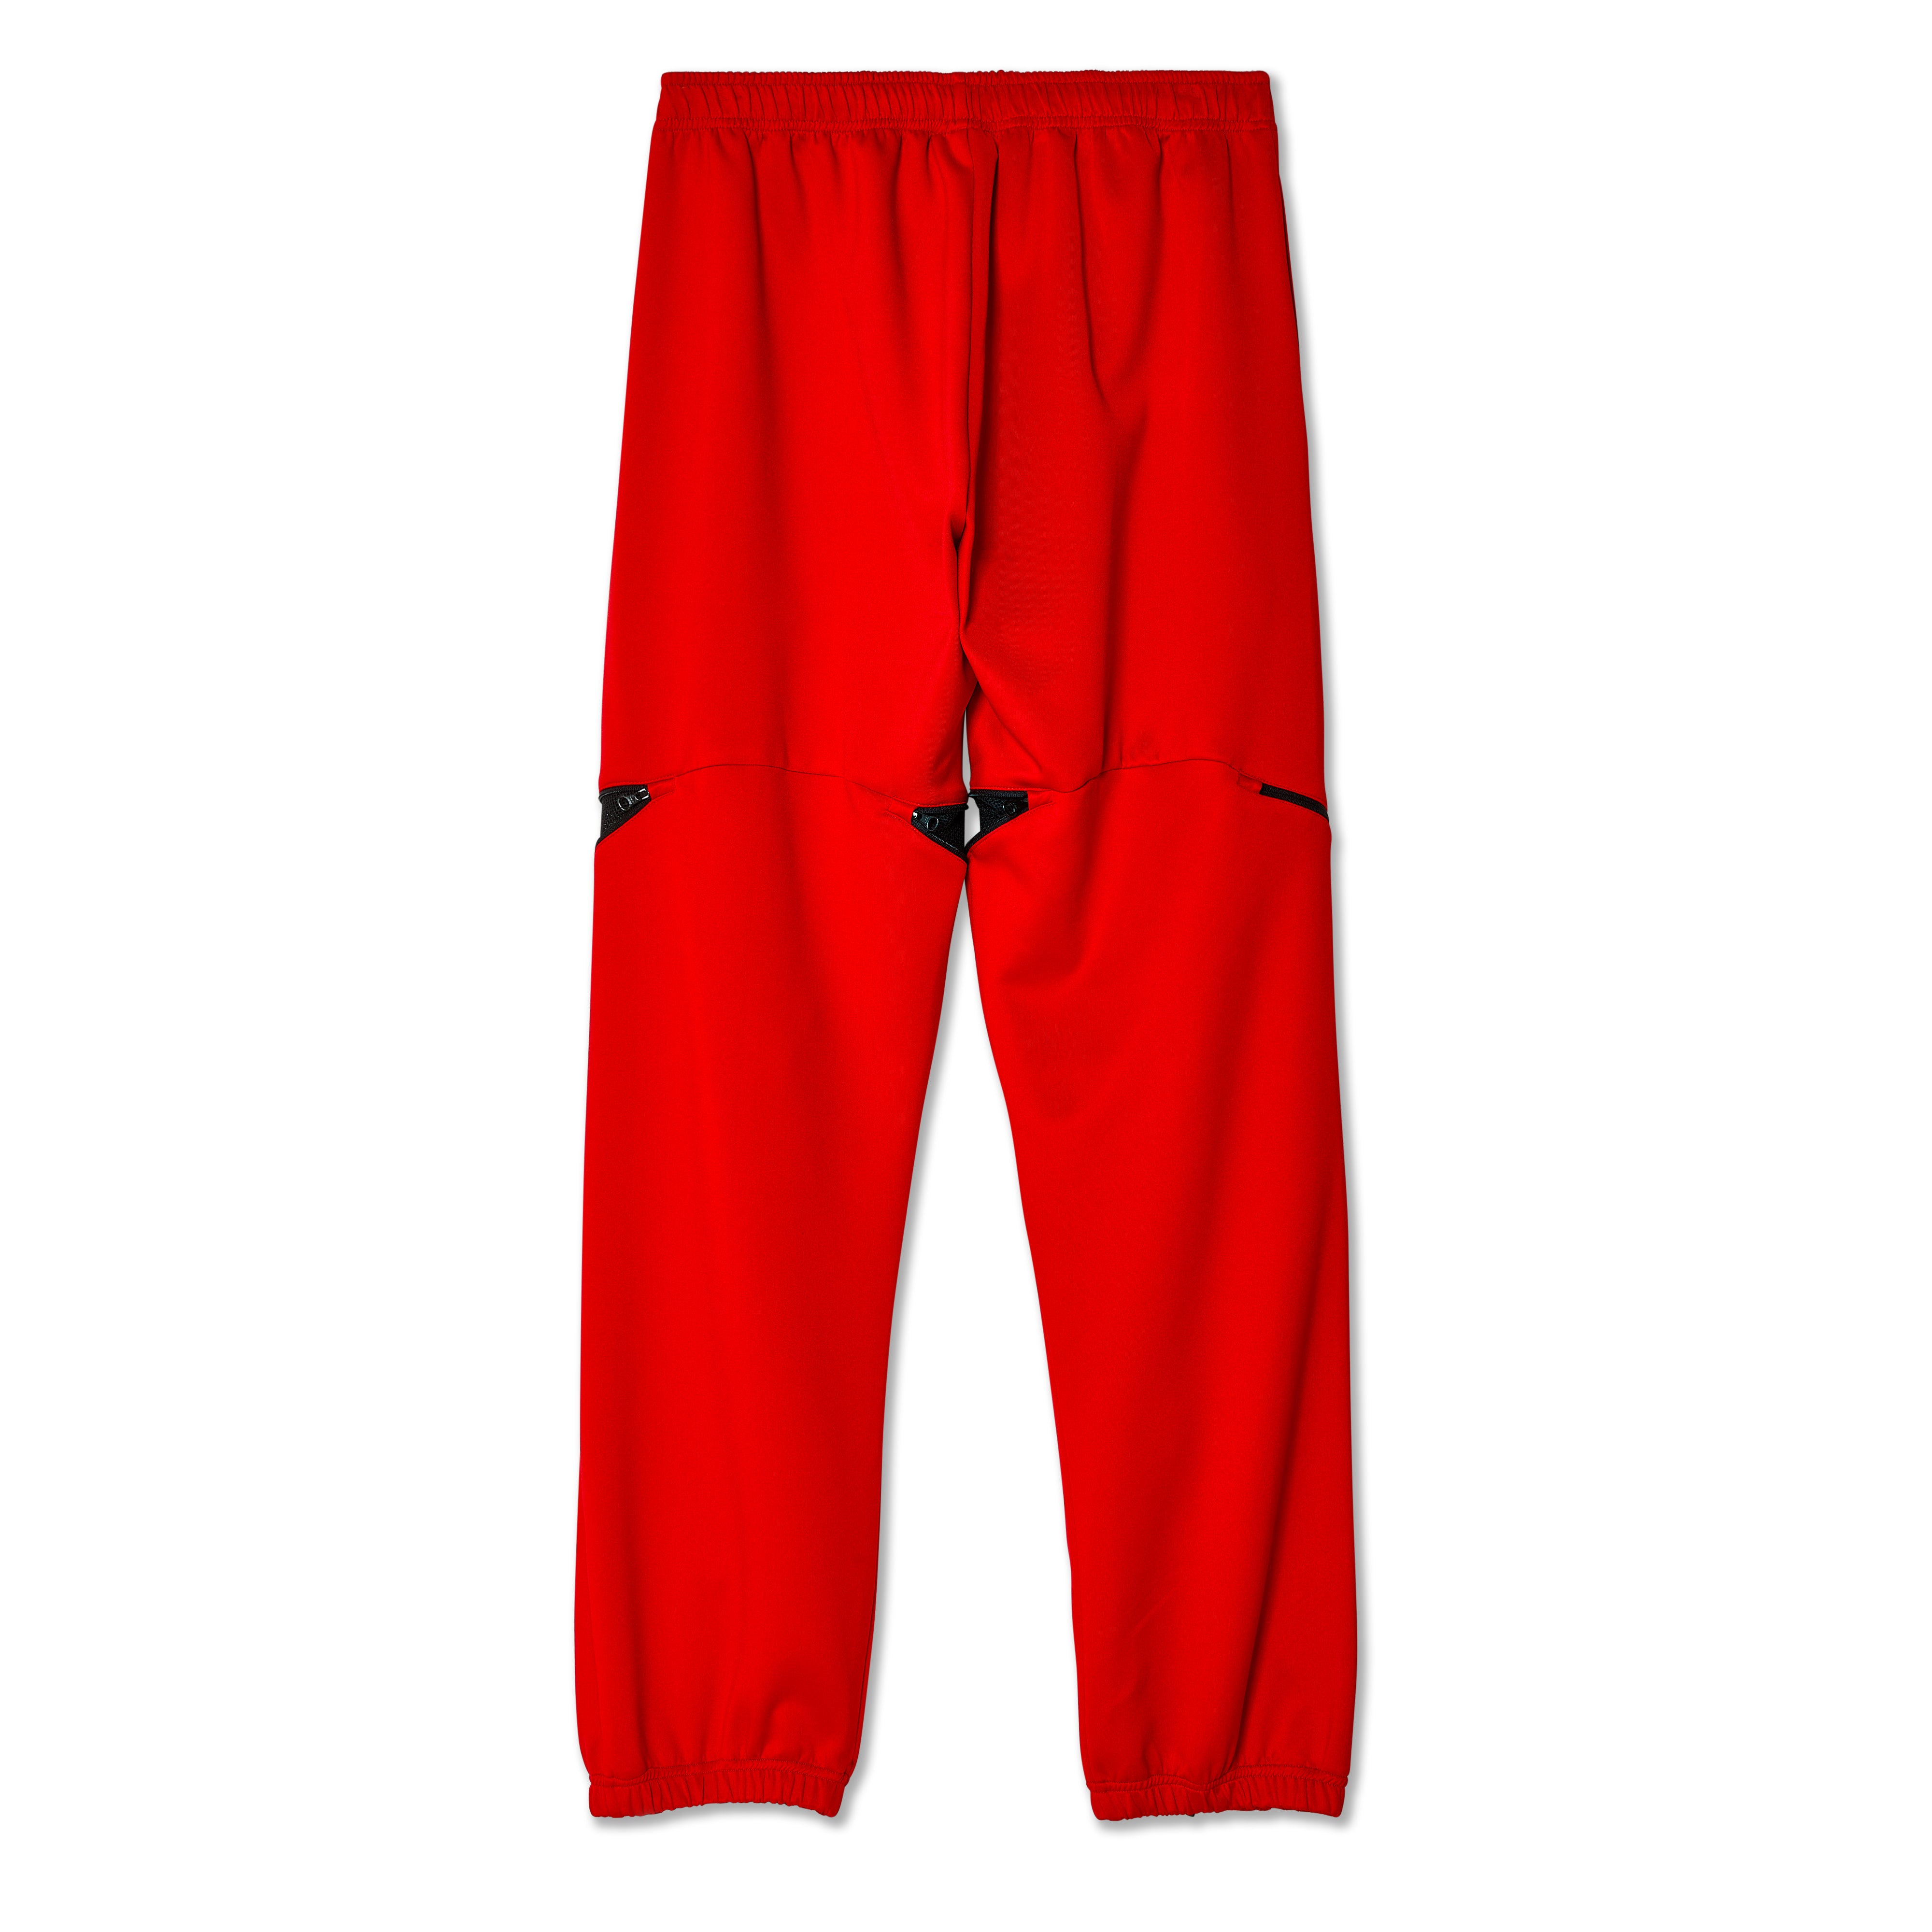 Olly Shinder - Men's Track Pant - (Red)